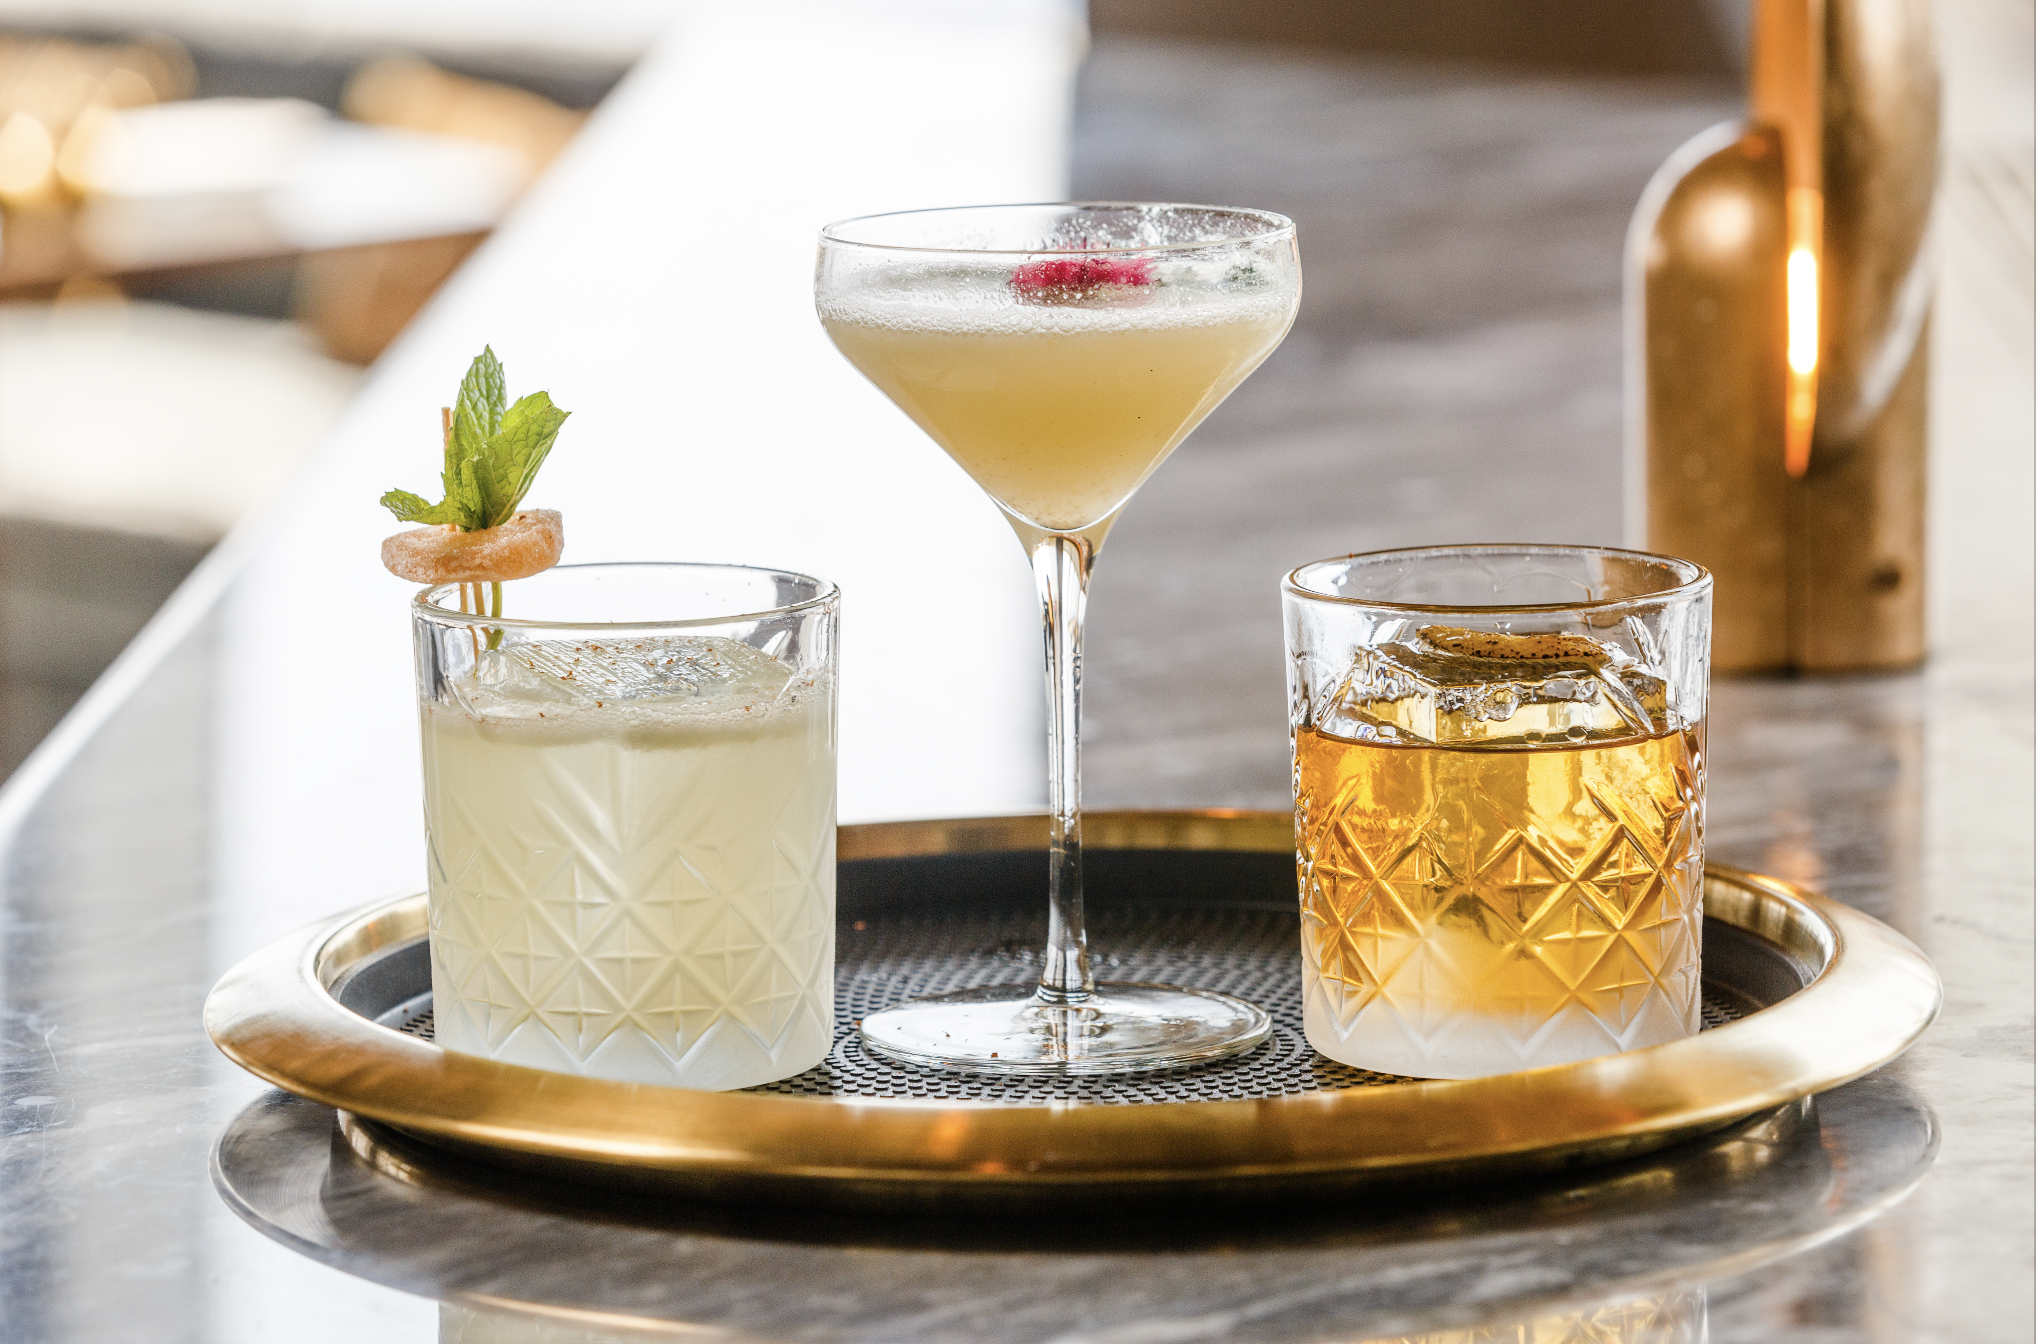 The Bars at Neiman Marcus in Hudson Yards — A Girl's Guide to Drinking Alone